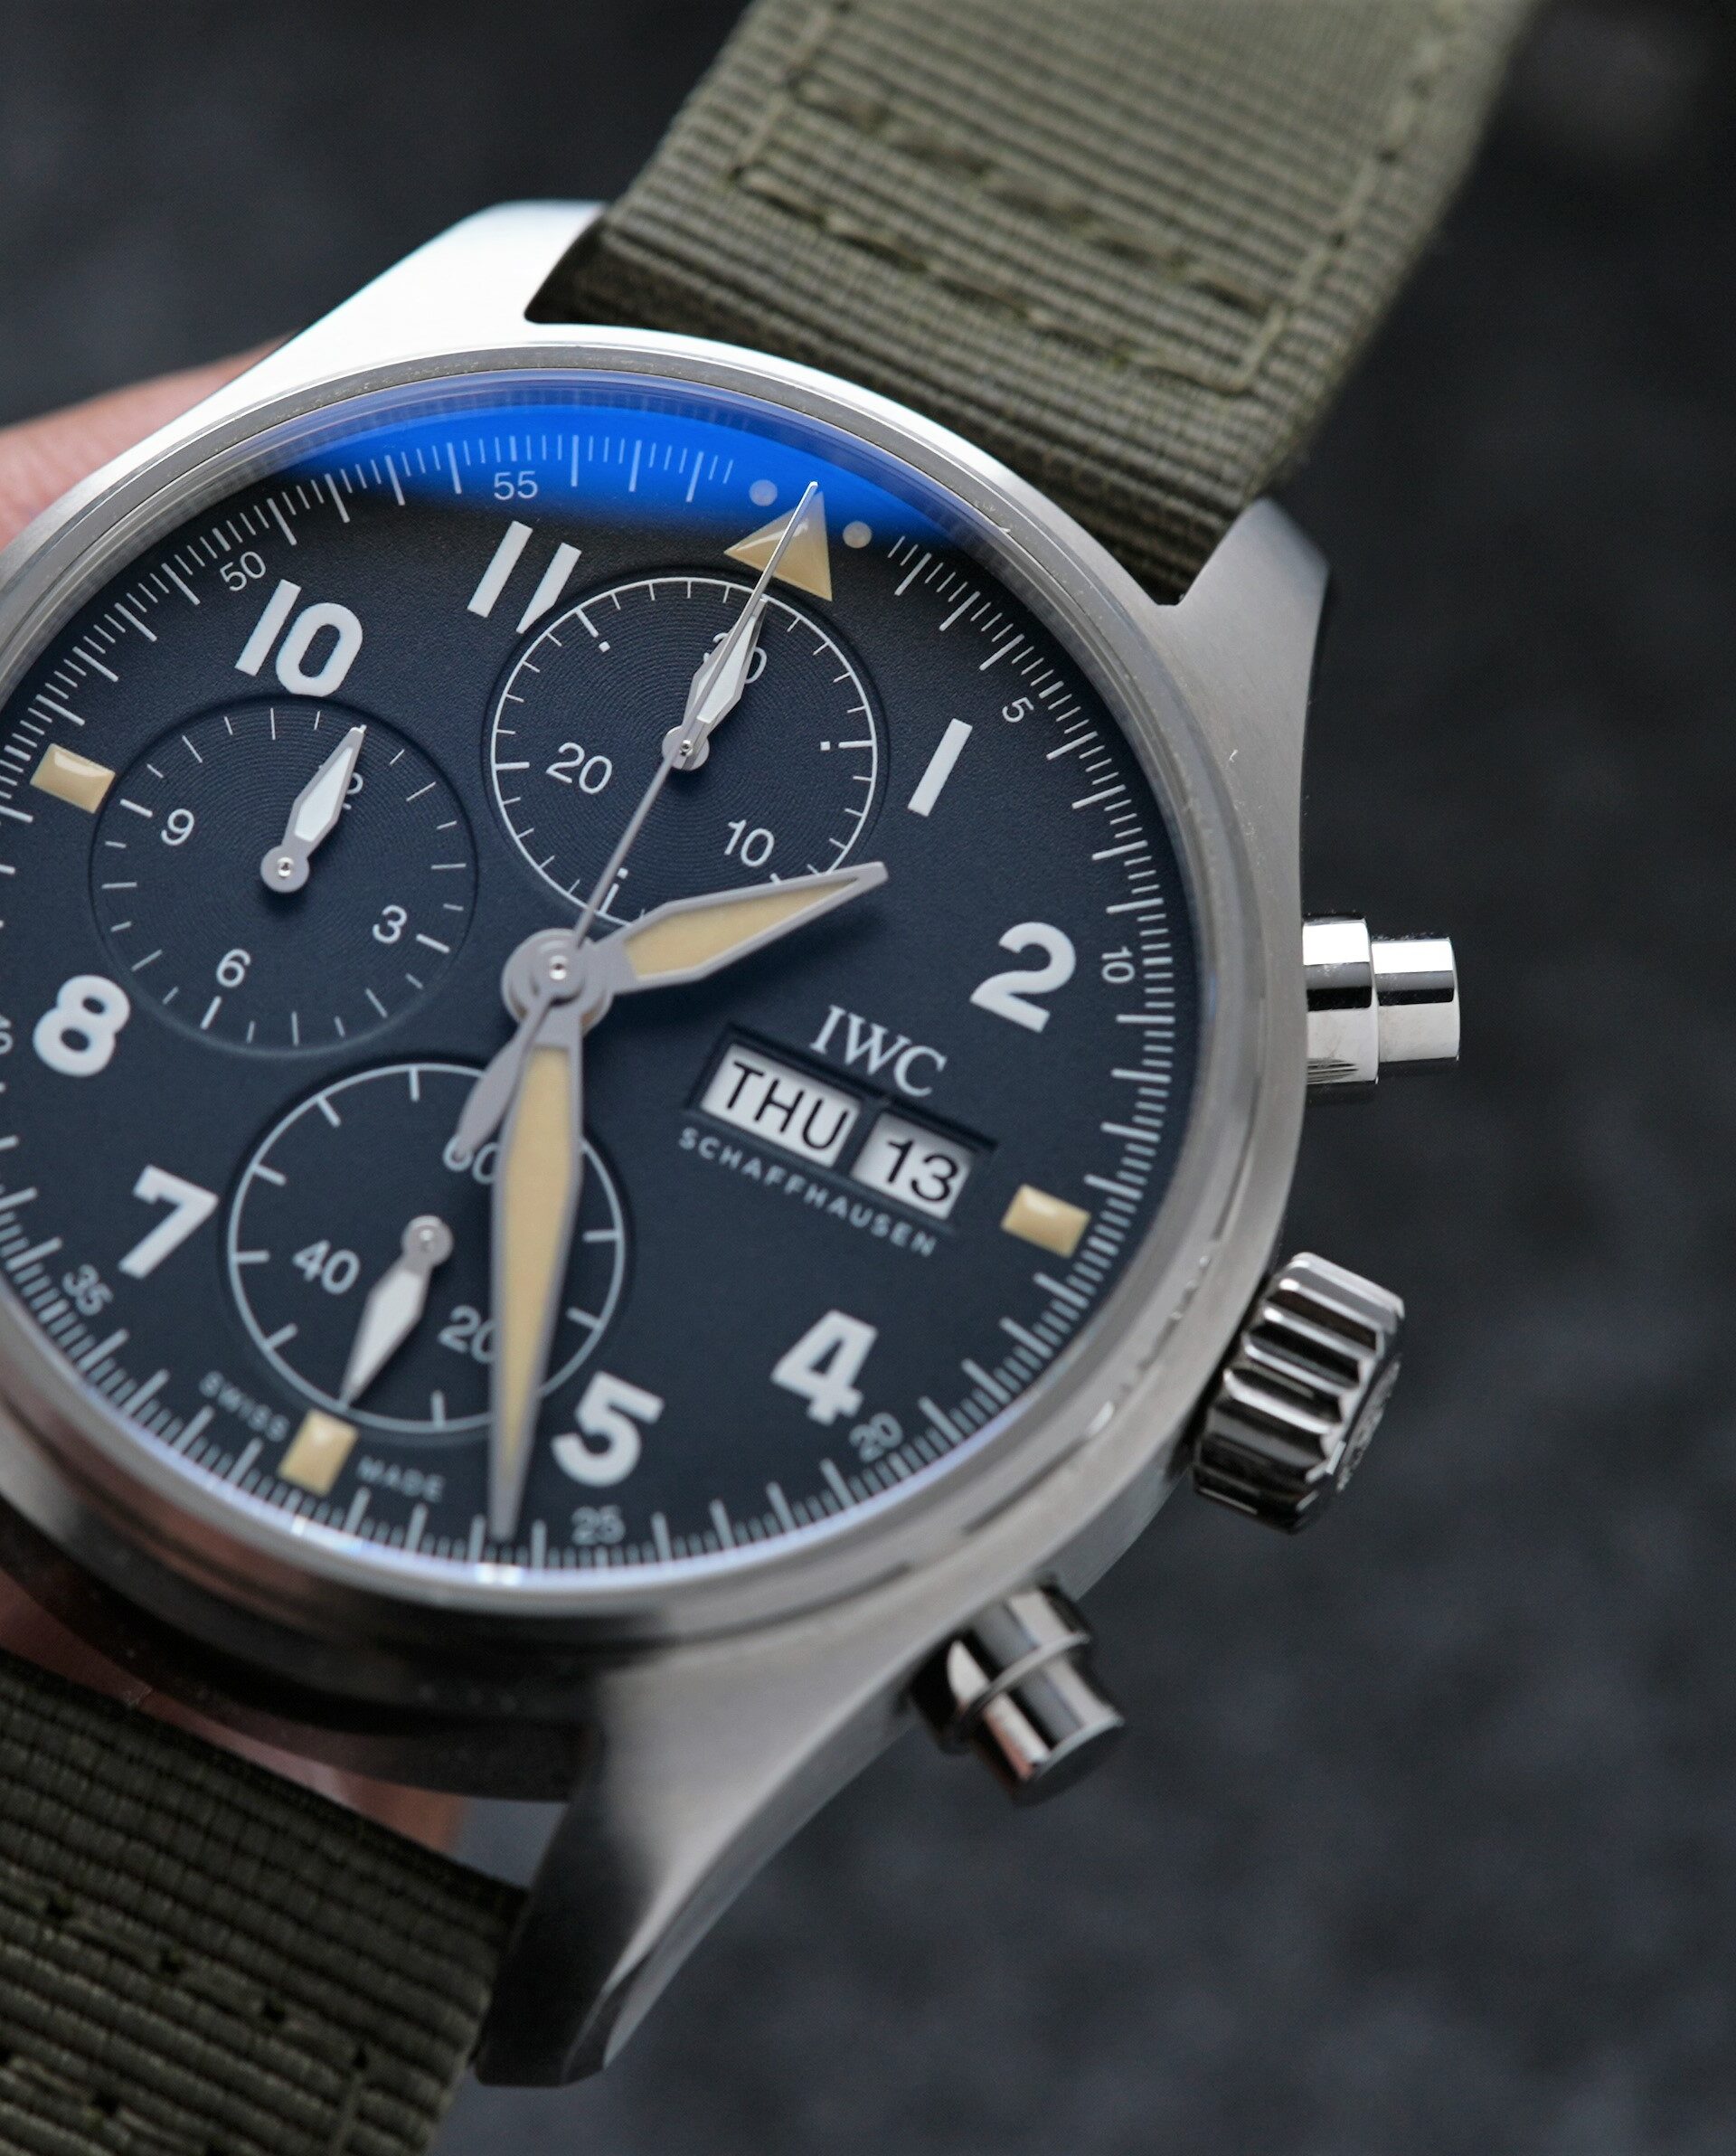 IWC Pilot Spitfire Chronograph 41MM IW387901 wristwatch being displayed in hand.